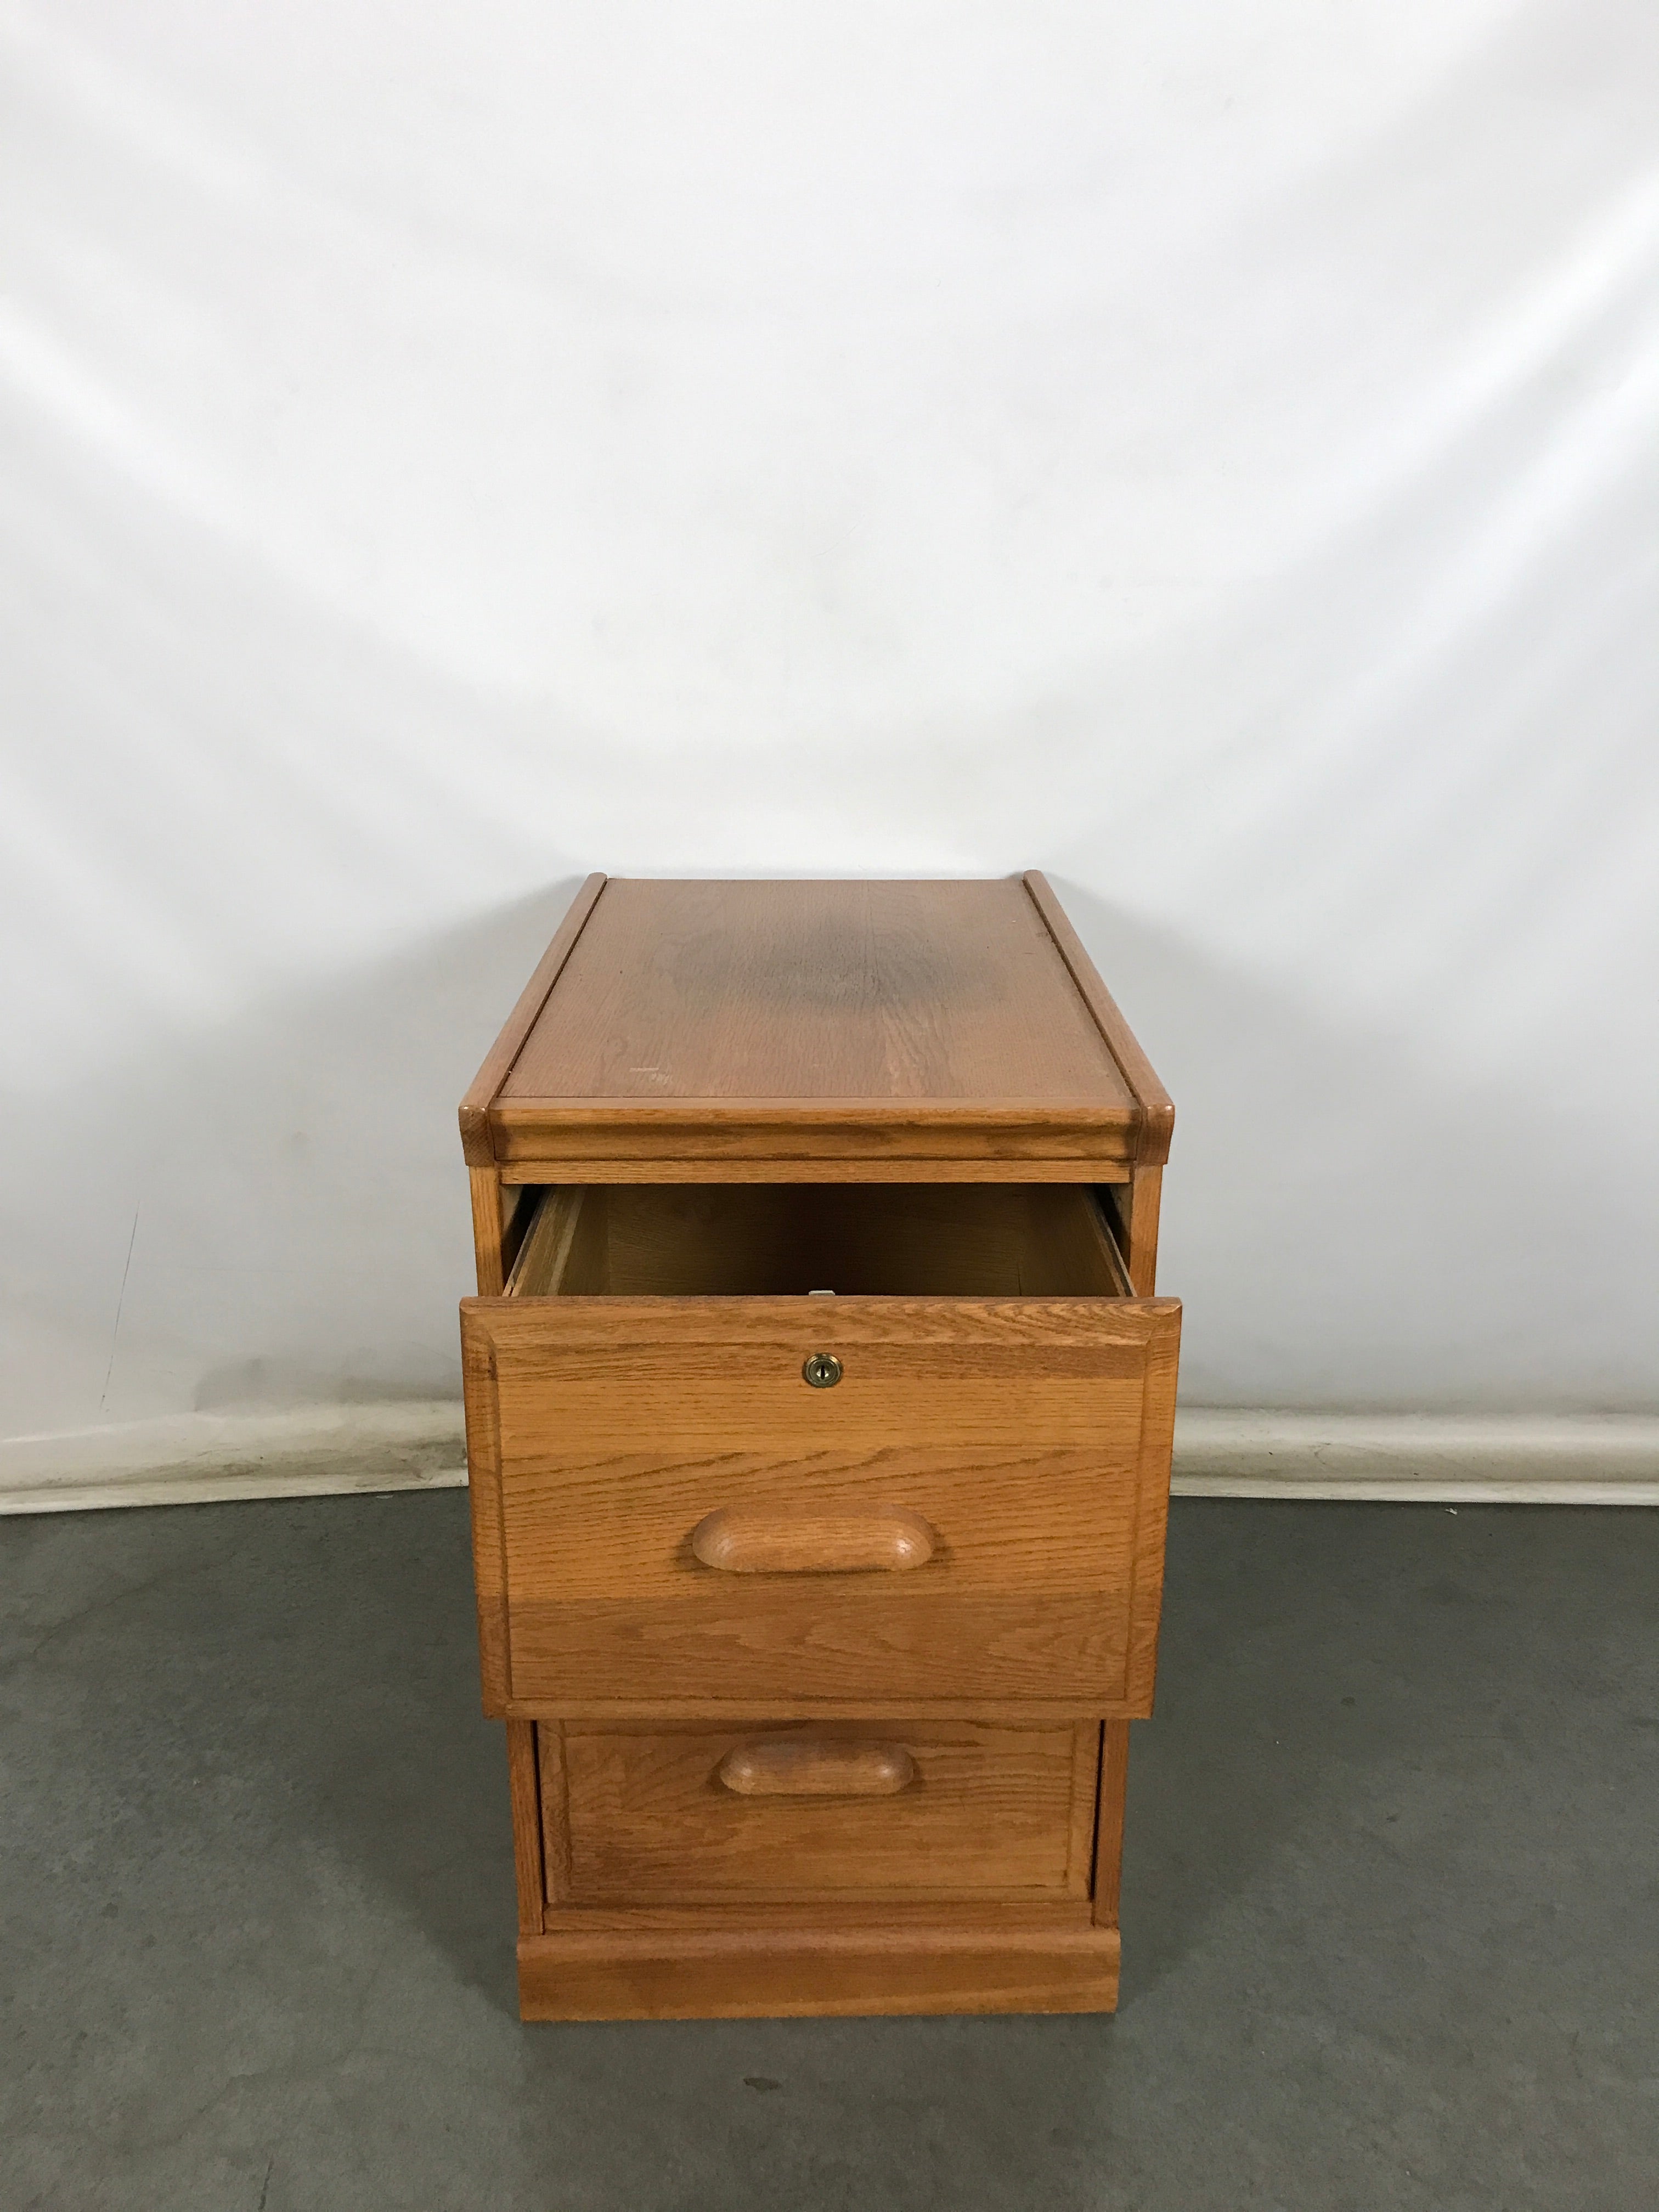 Wooden Two Drawer File Cabinet